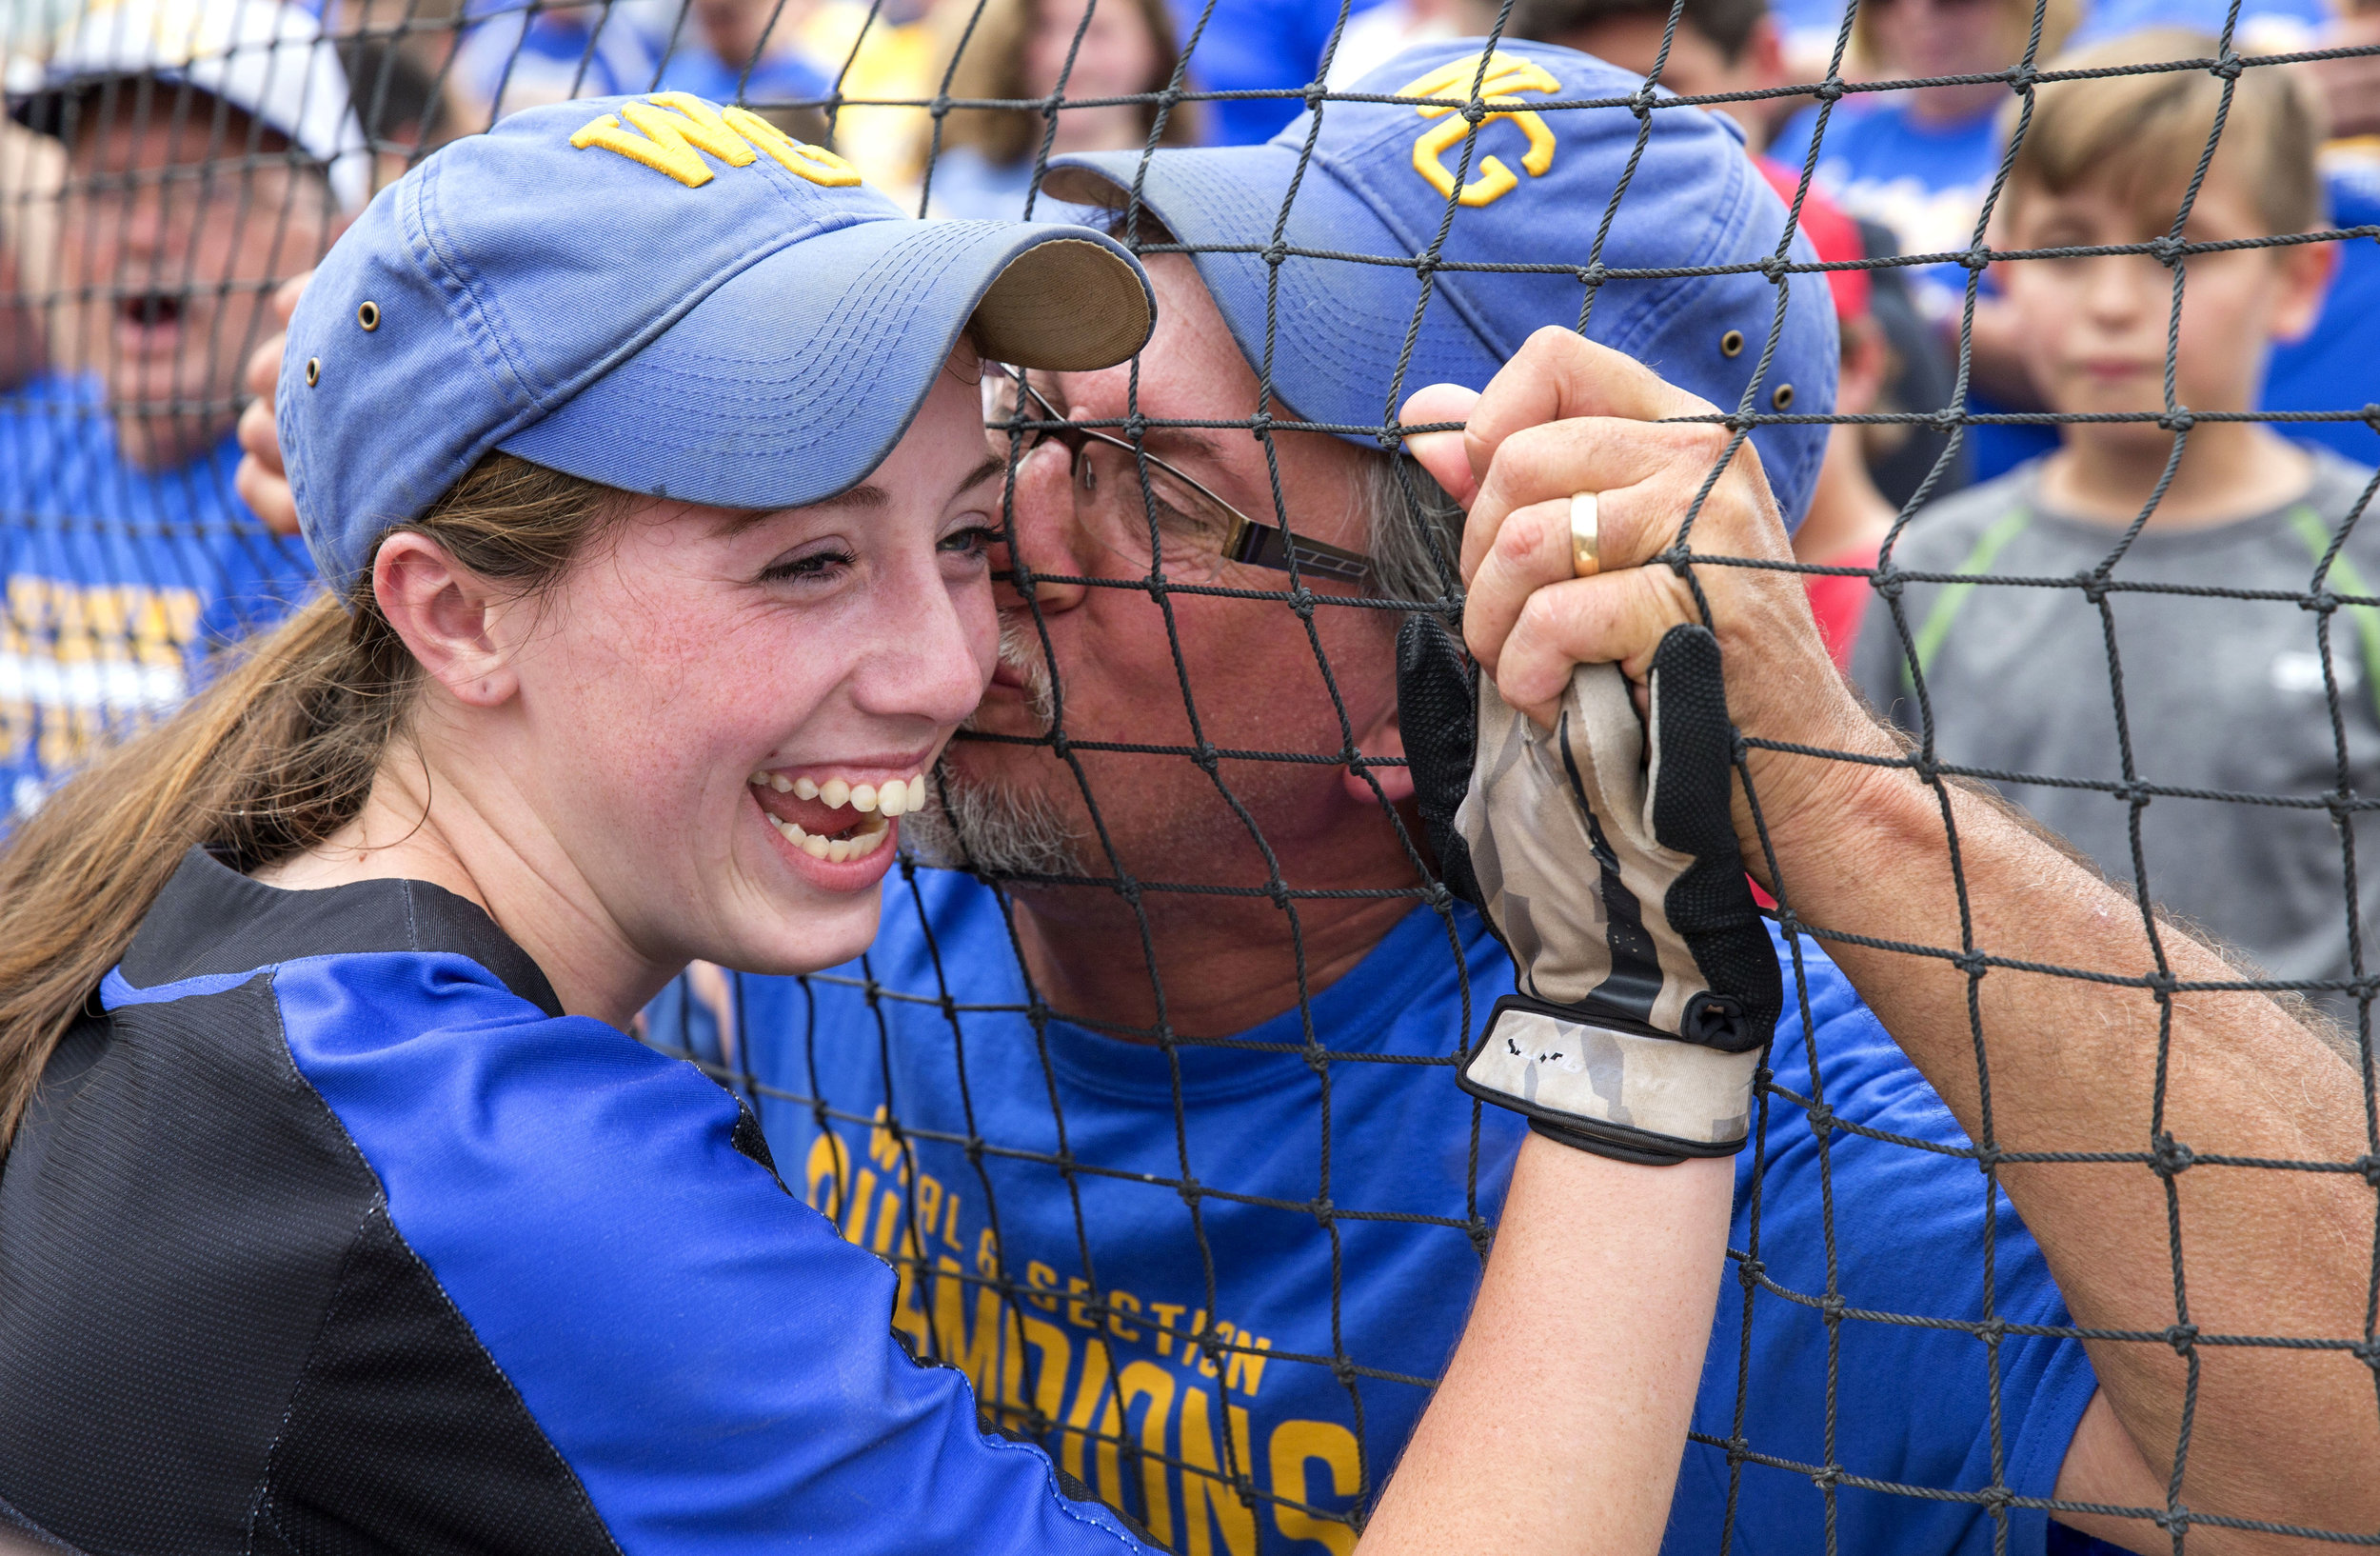  John Lampe, of West Greene, kisses his daughters cheek, Madison Lampe (4), after her team came back to win the state championship at Beard Field on Friday, June 16, 2017. West Greene was down 7-0 in the 2nd inning but rallied together to defeat Will